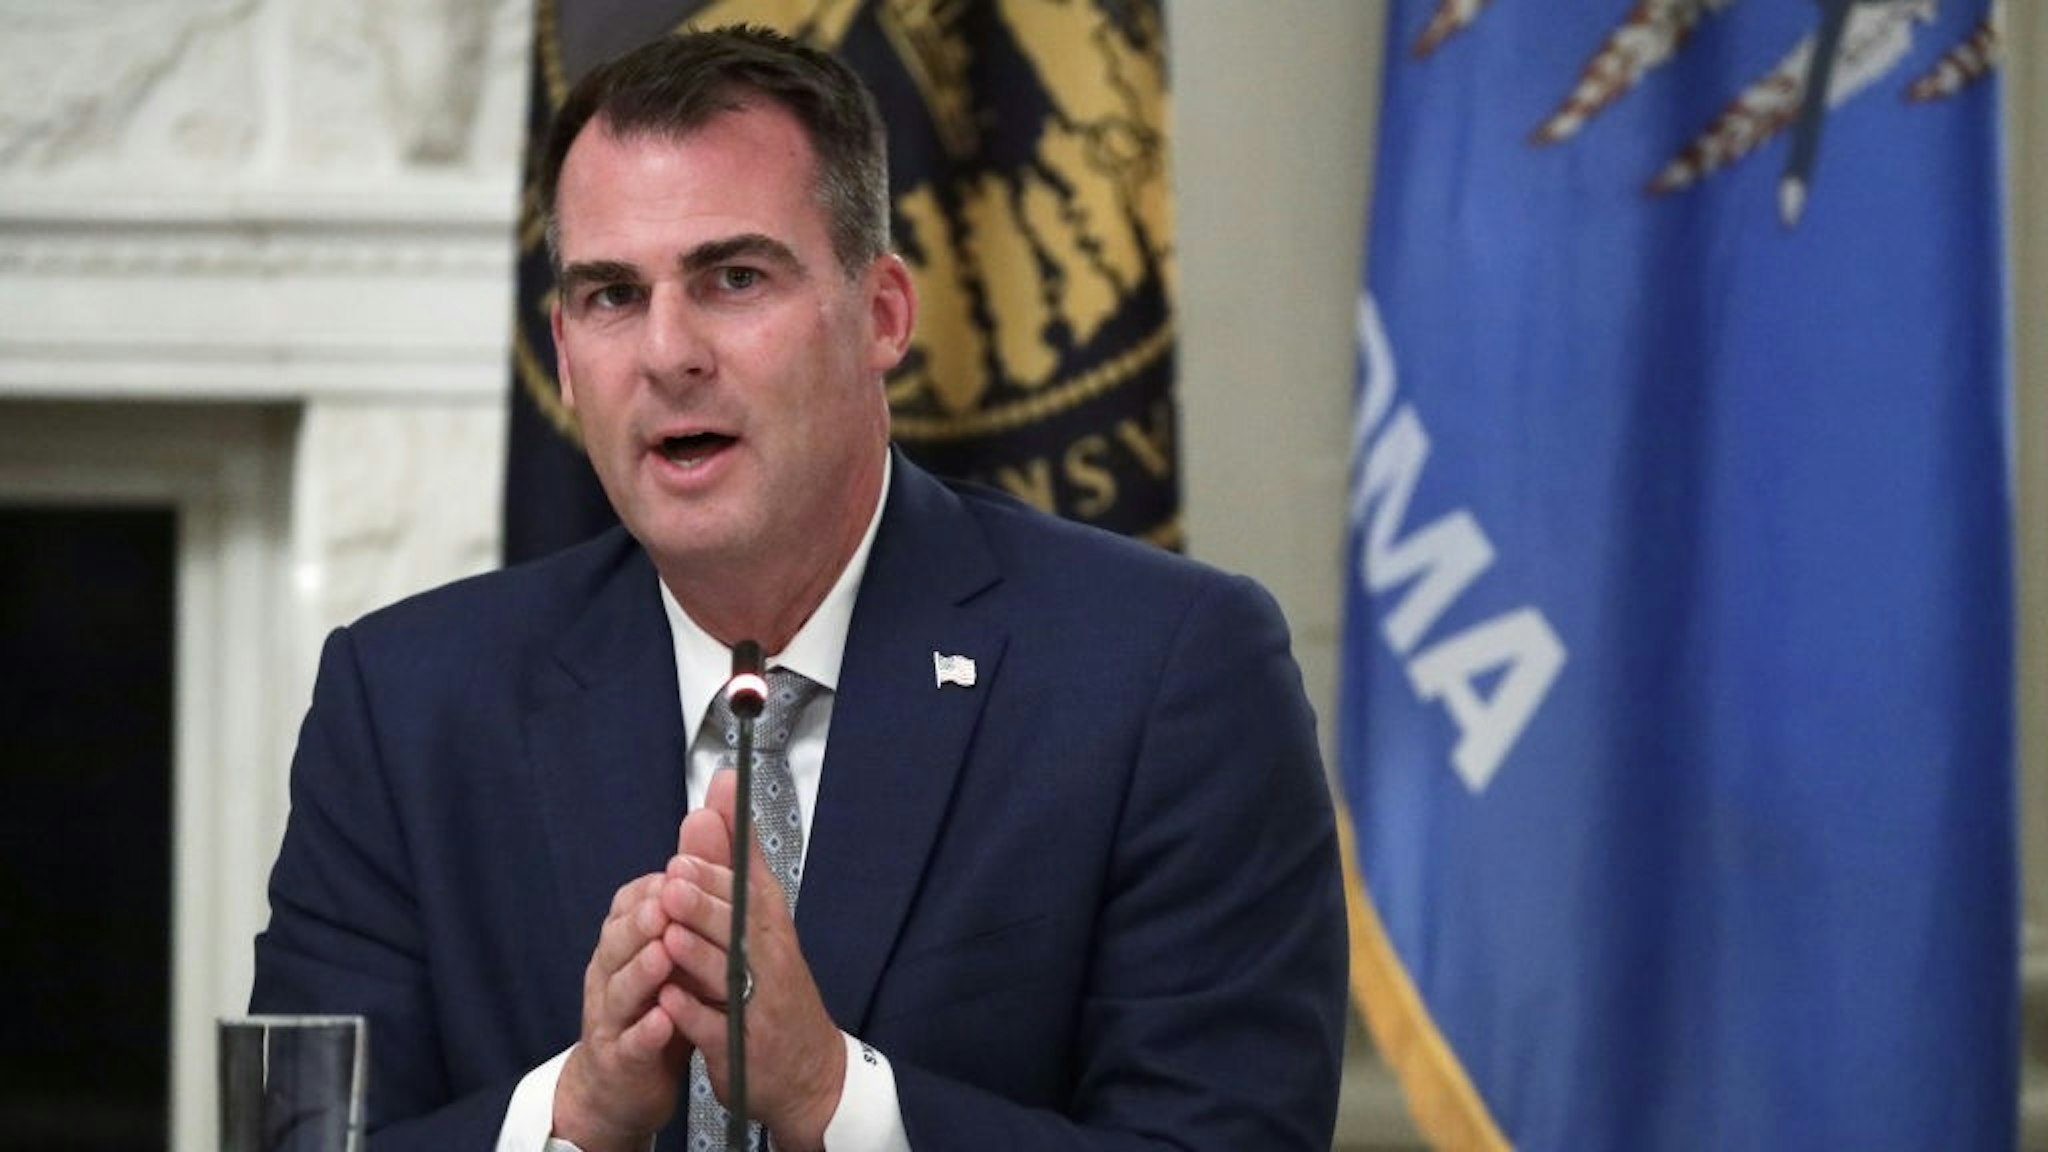 WASHINGTON, DC - JUNE 18: Governor Kevin Stitt (R-OK) speaks during a roundtable at the State Dining Room of the White House June 18, 2020 in Washington, DC. President Trump held a roundtable discussion with Governors and small business owners on the reopening of American’s small business. (Photo by Alex Wong/Getty Images)